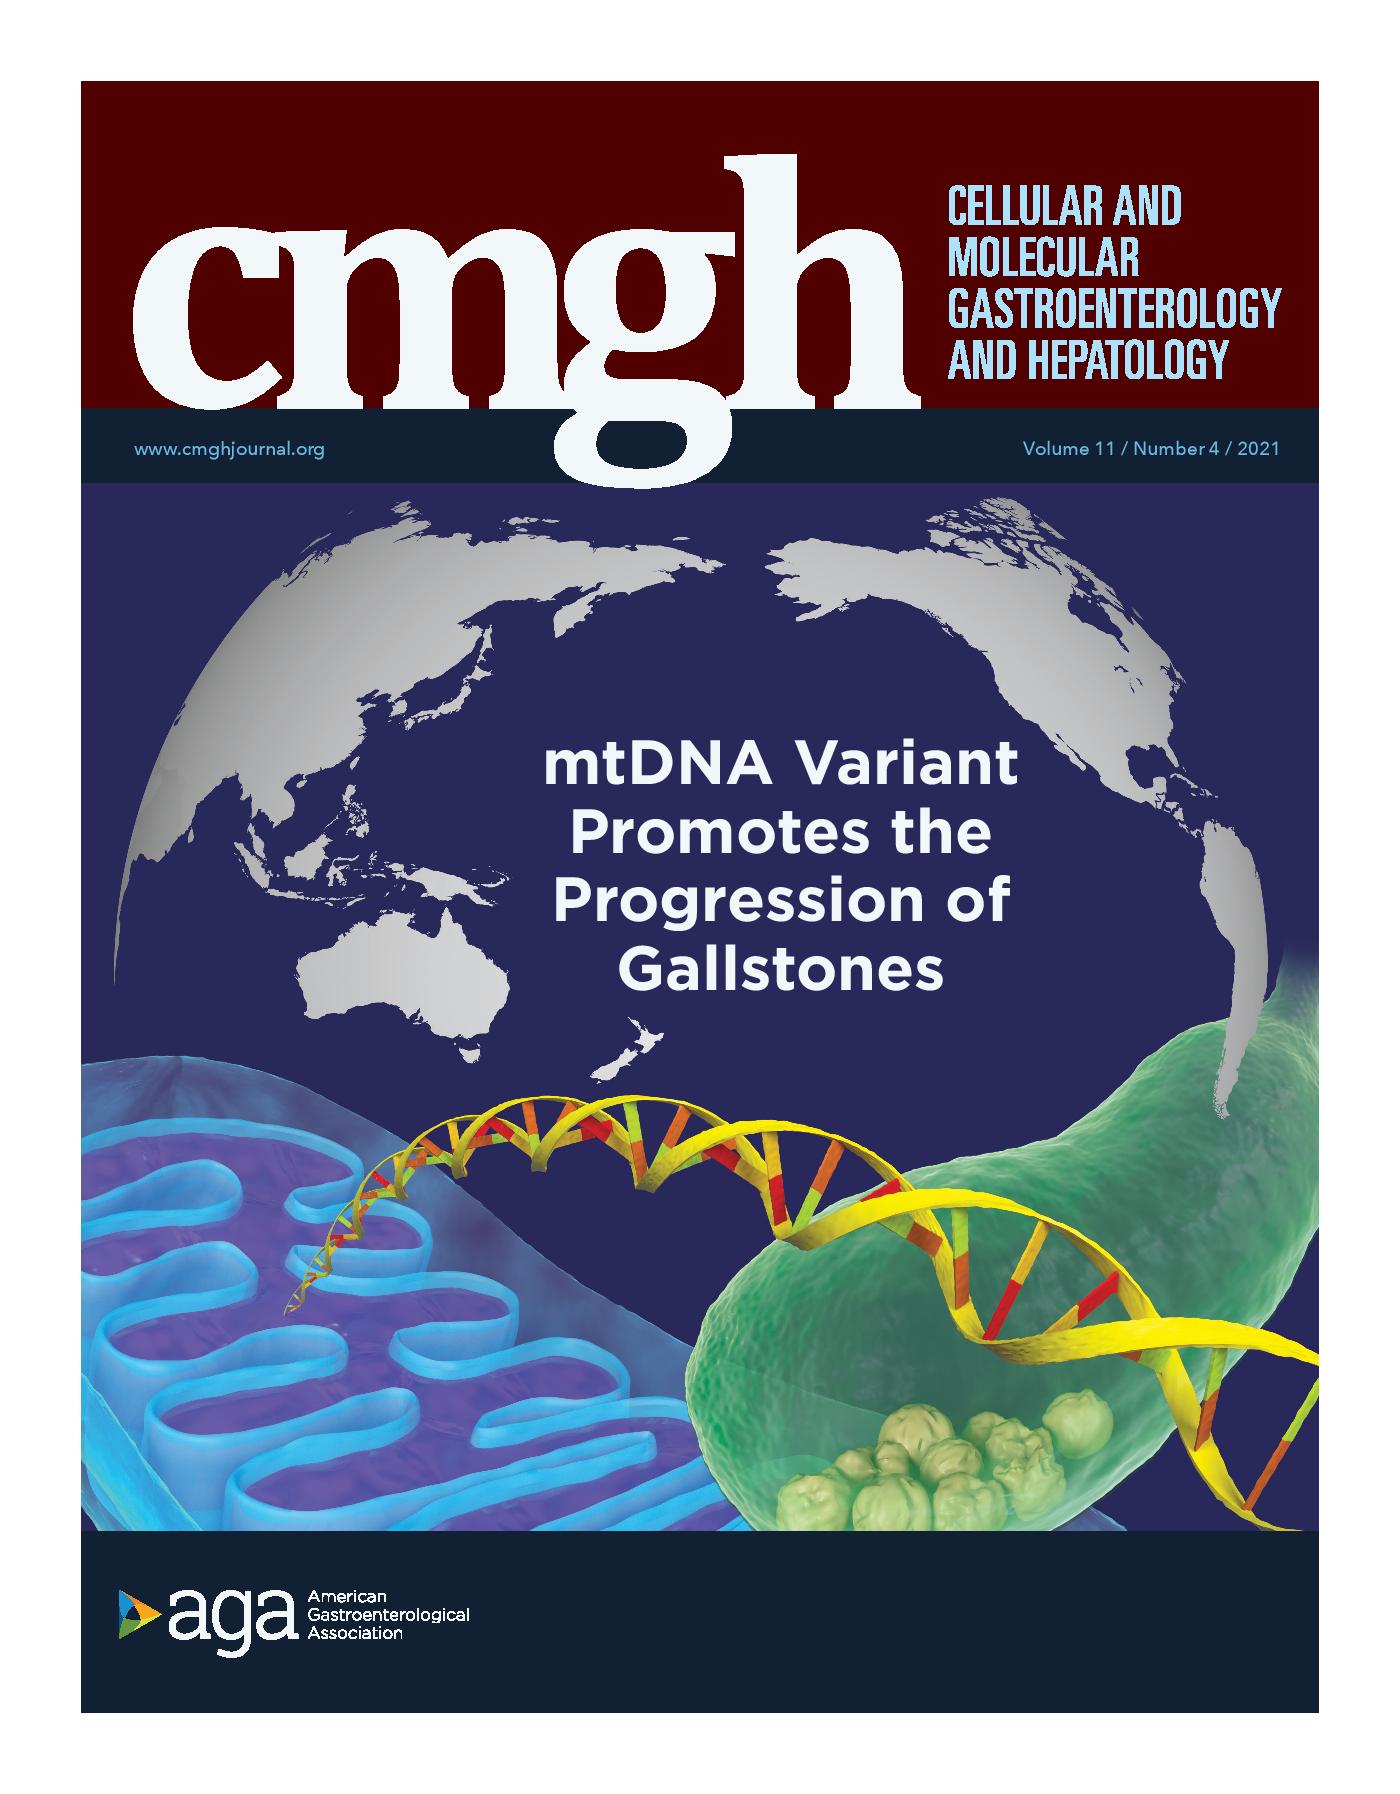 LetPub Journal Cover Art Design - A Mitochondrial DNA Variant Elevates the Risk of Gallstone Disease by Altering Mitochondrial Function